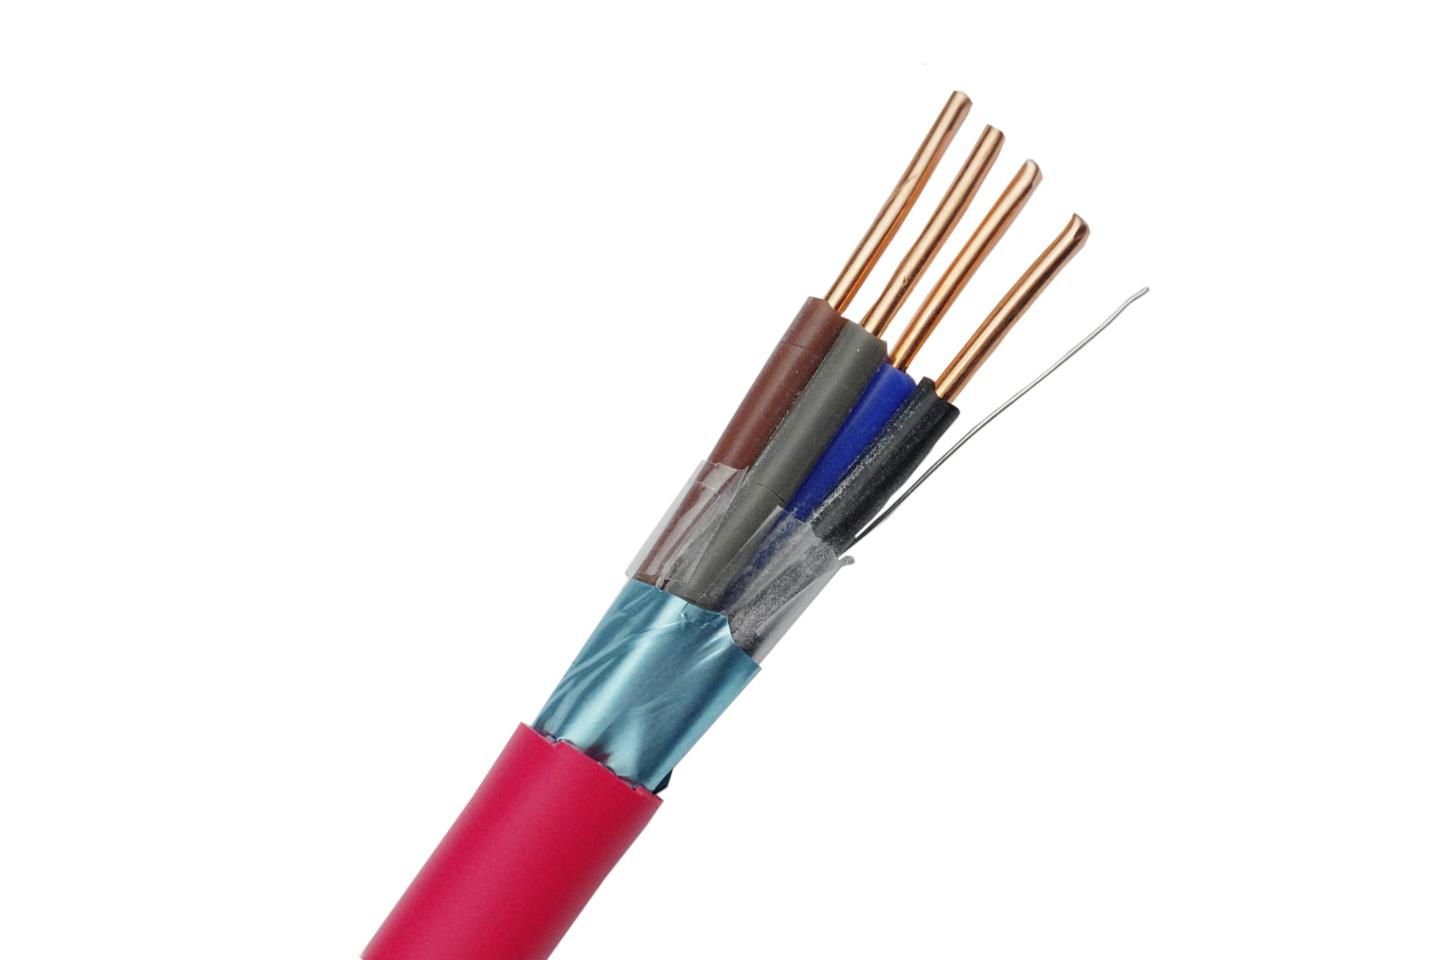 FRLS PVC Shielded Fire Resistant Cable for Security , Fire Proof Cable